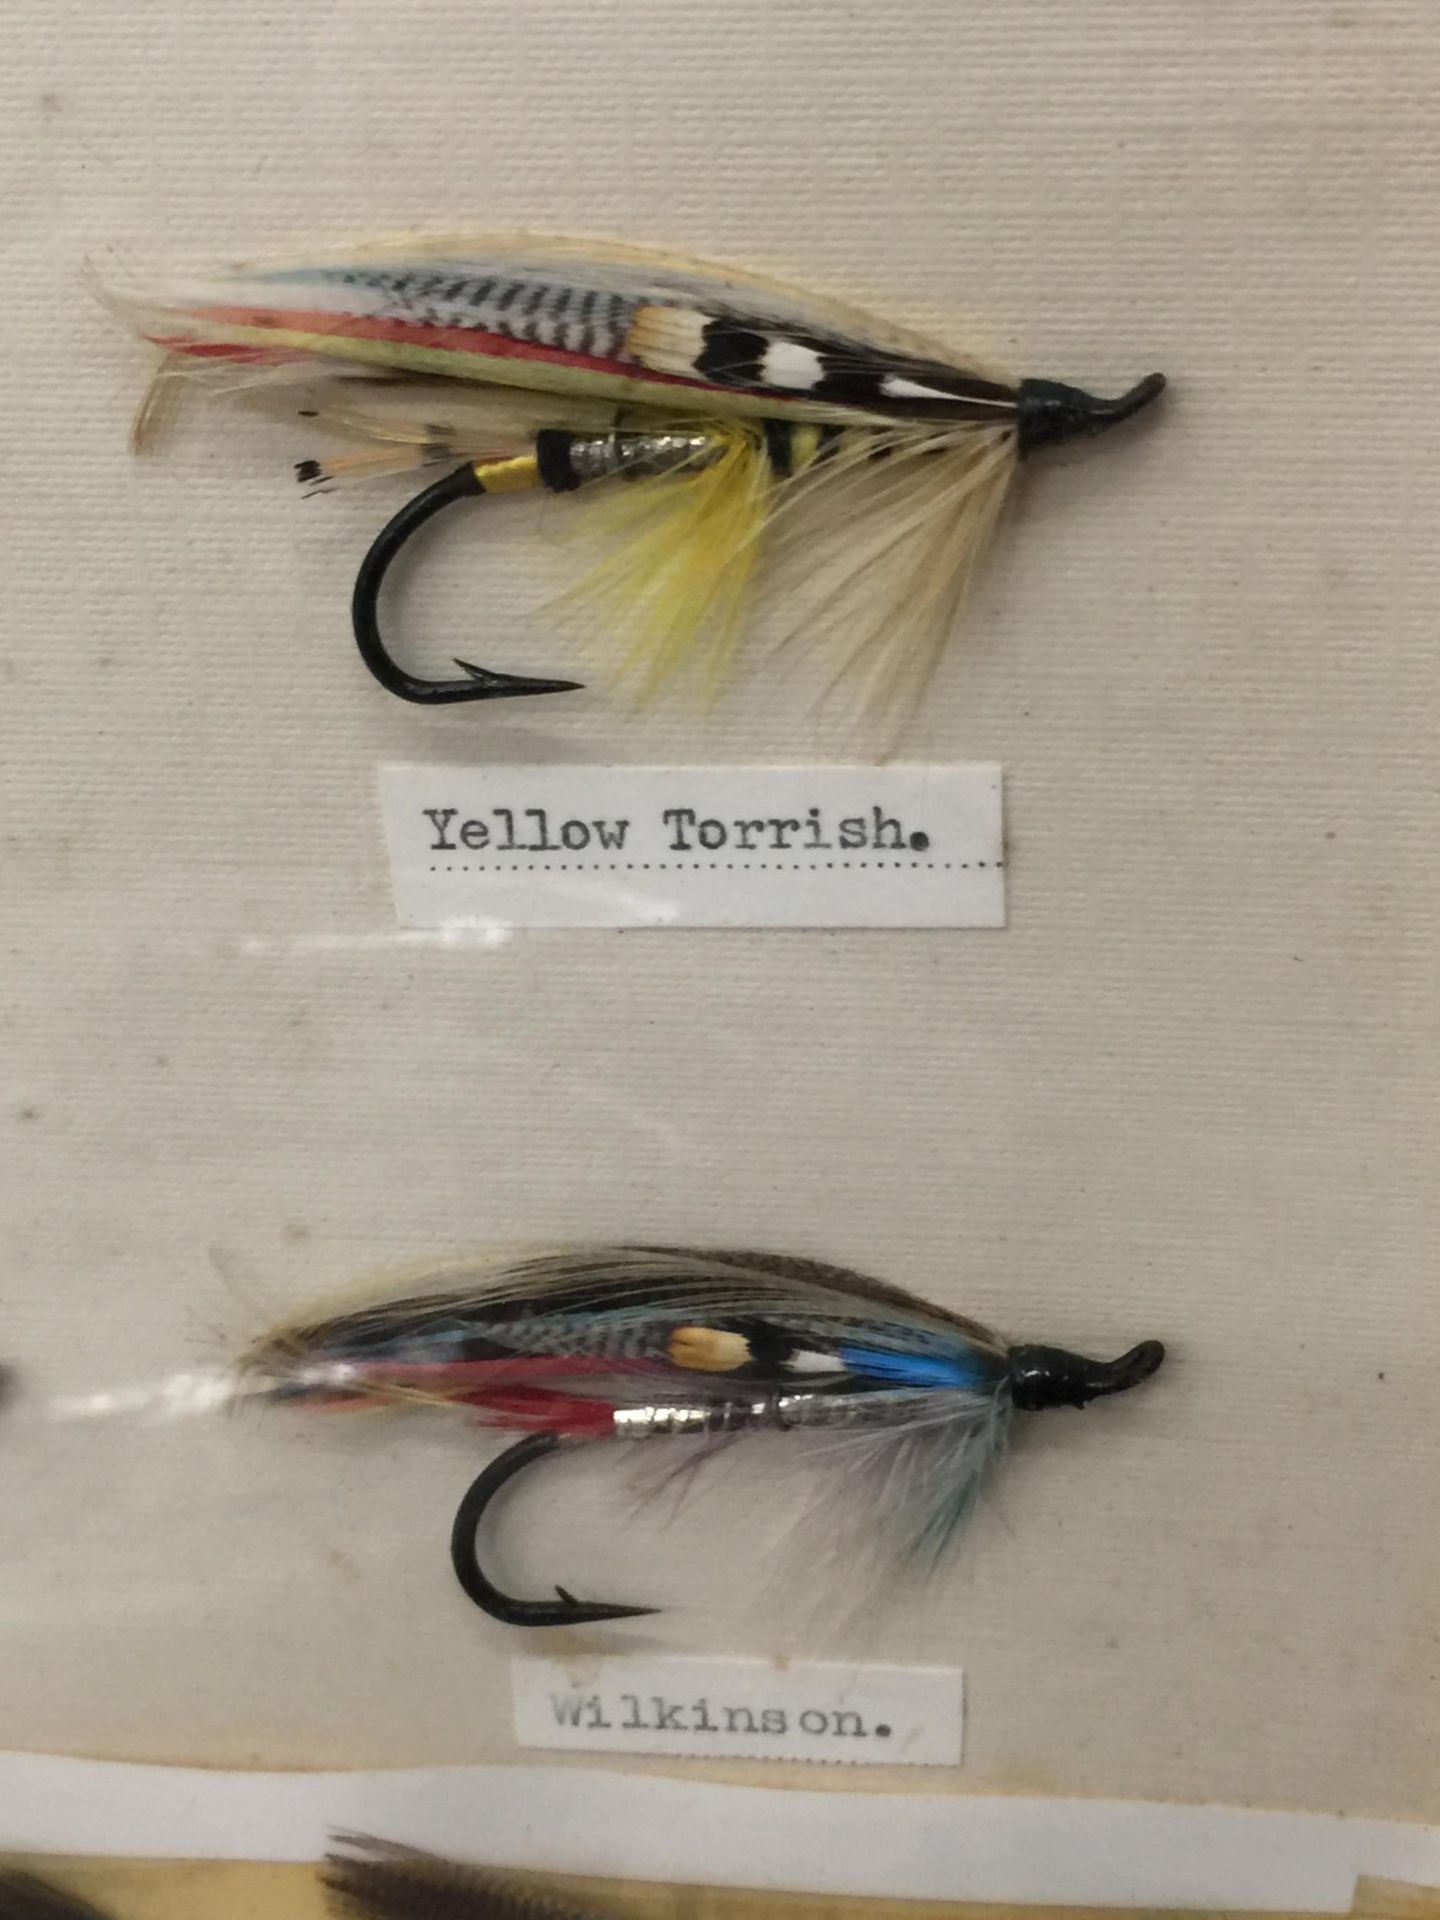 A FRAMED FISHING BAIT MONTAGE - Image 2 of 4